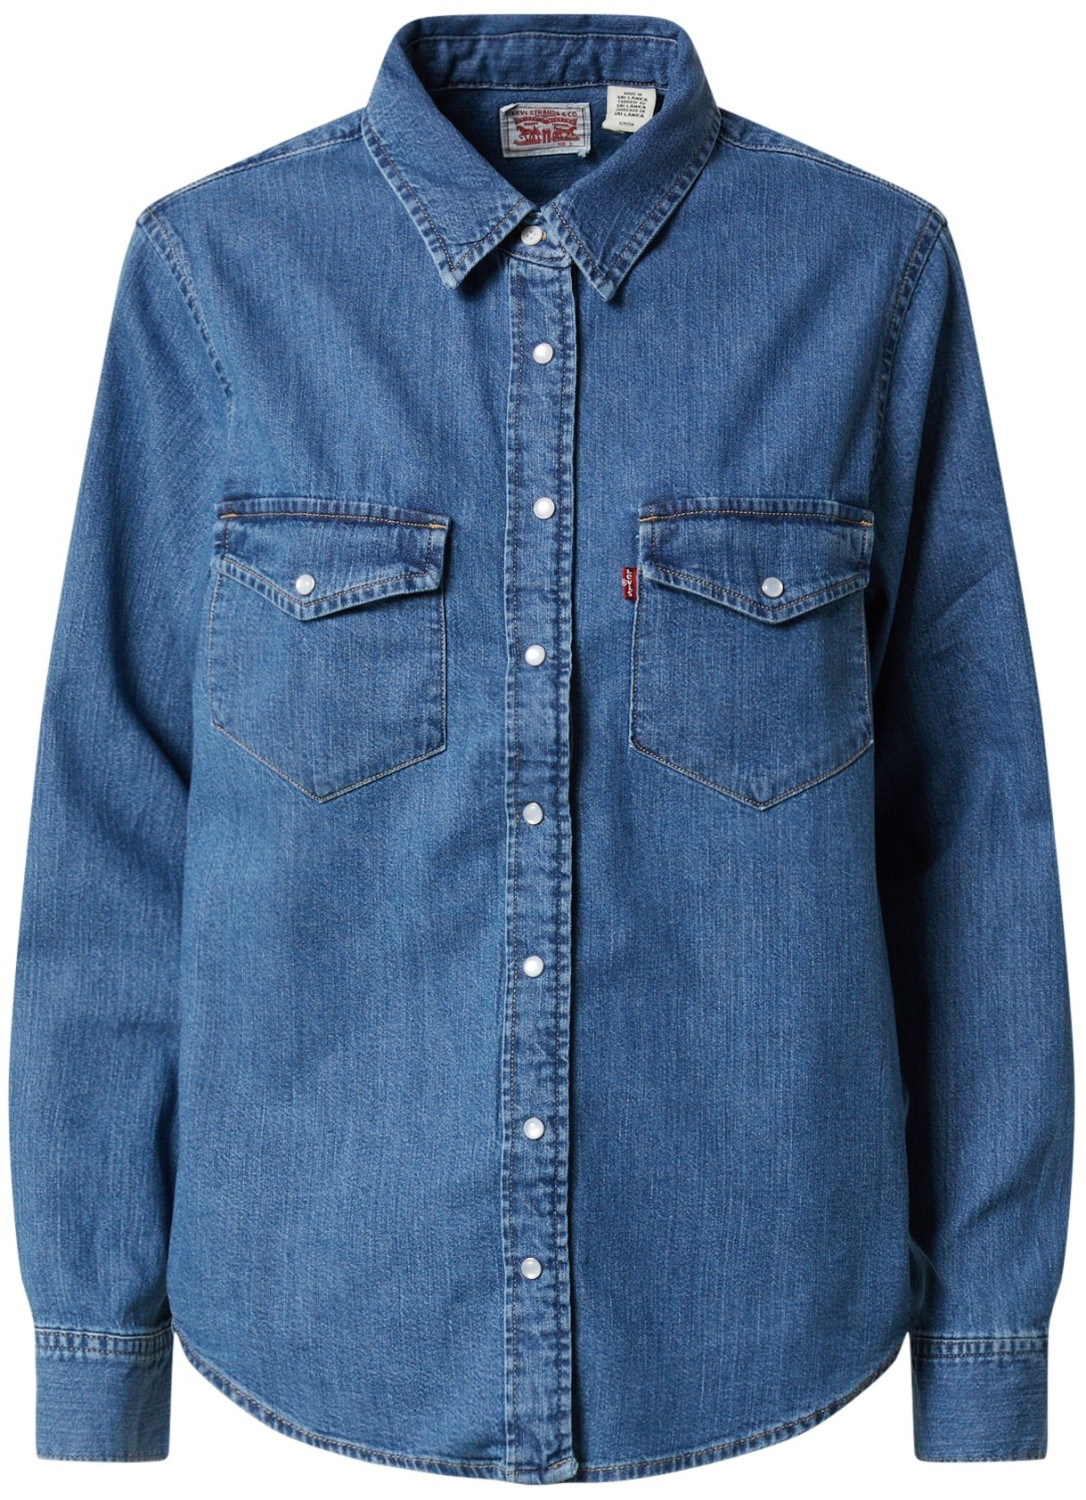 £36.99 (Today) Western Shirt Levi\'s on – from Best Essential Deals Buy